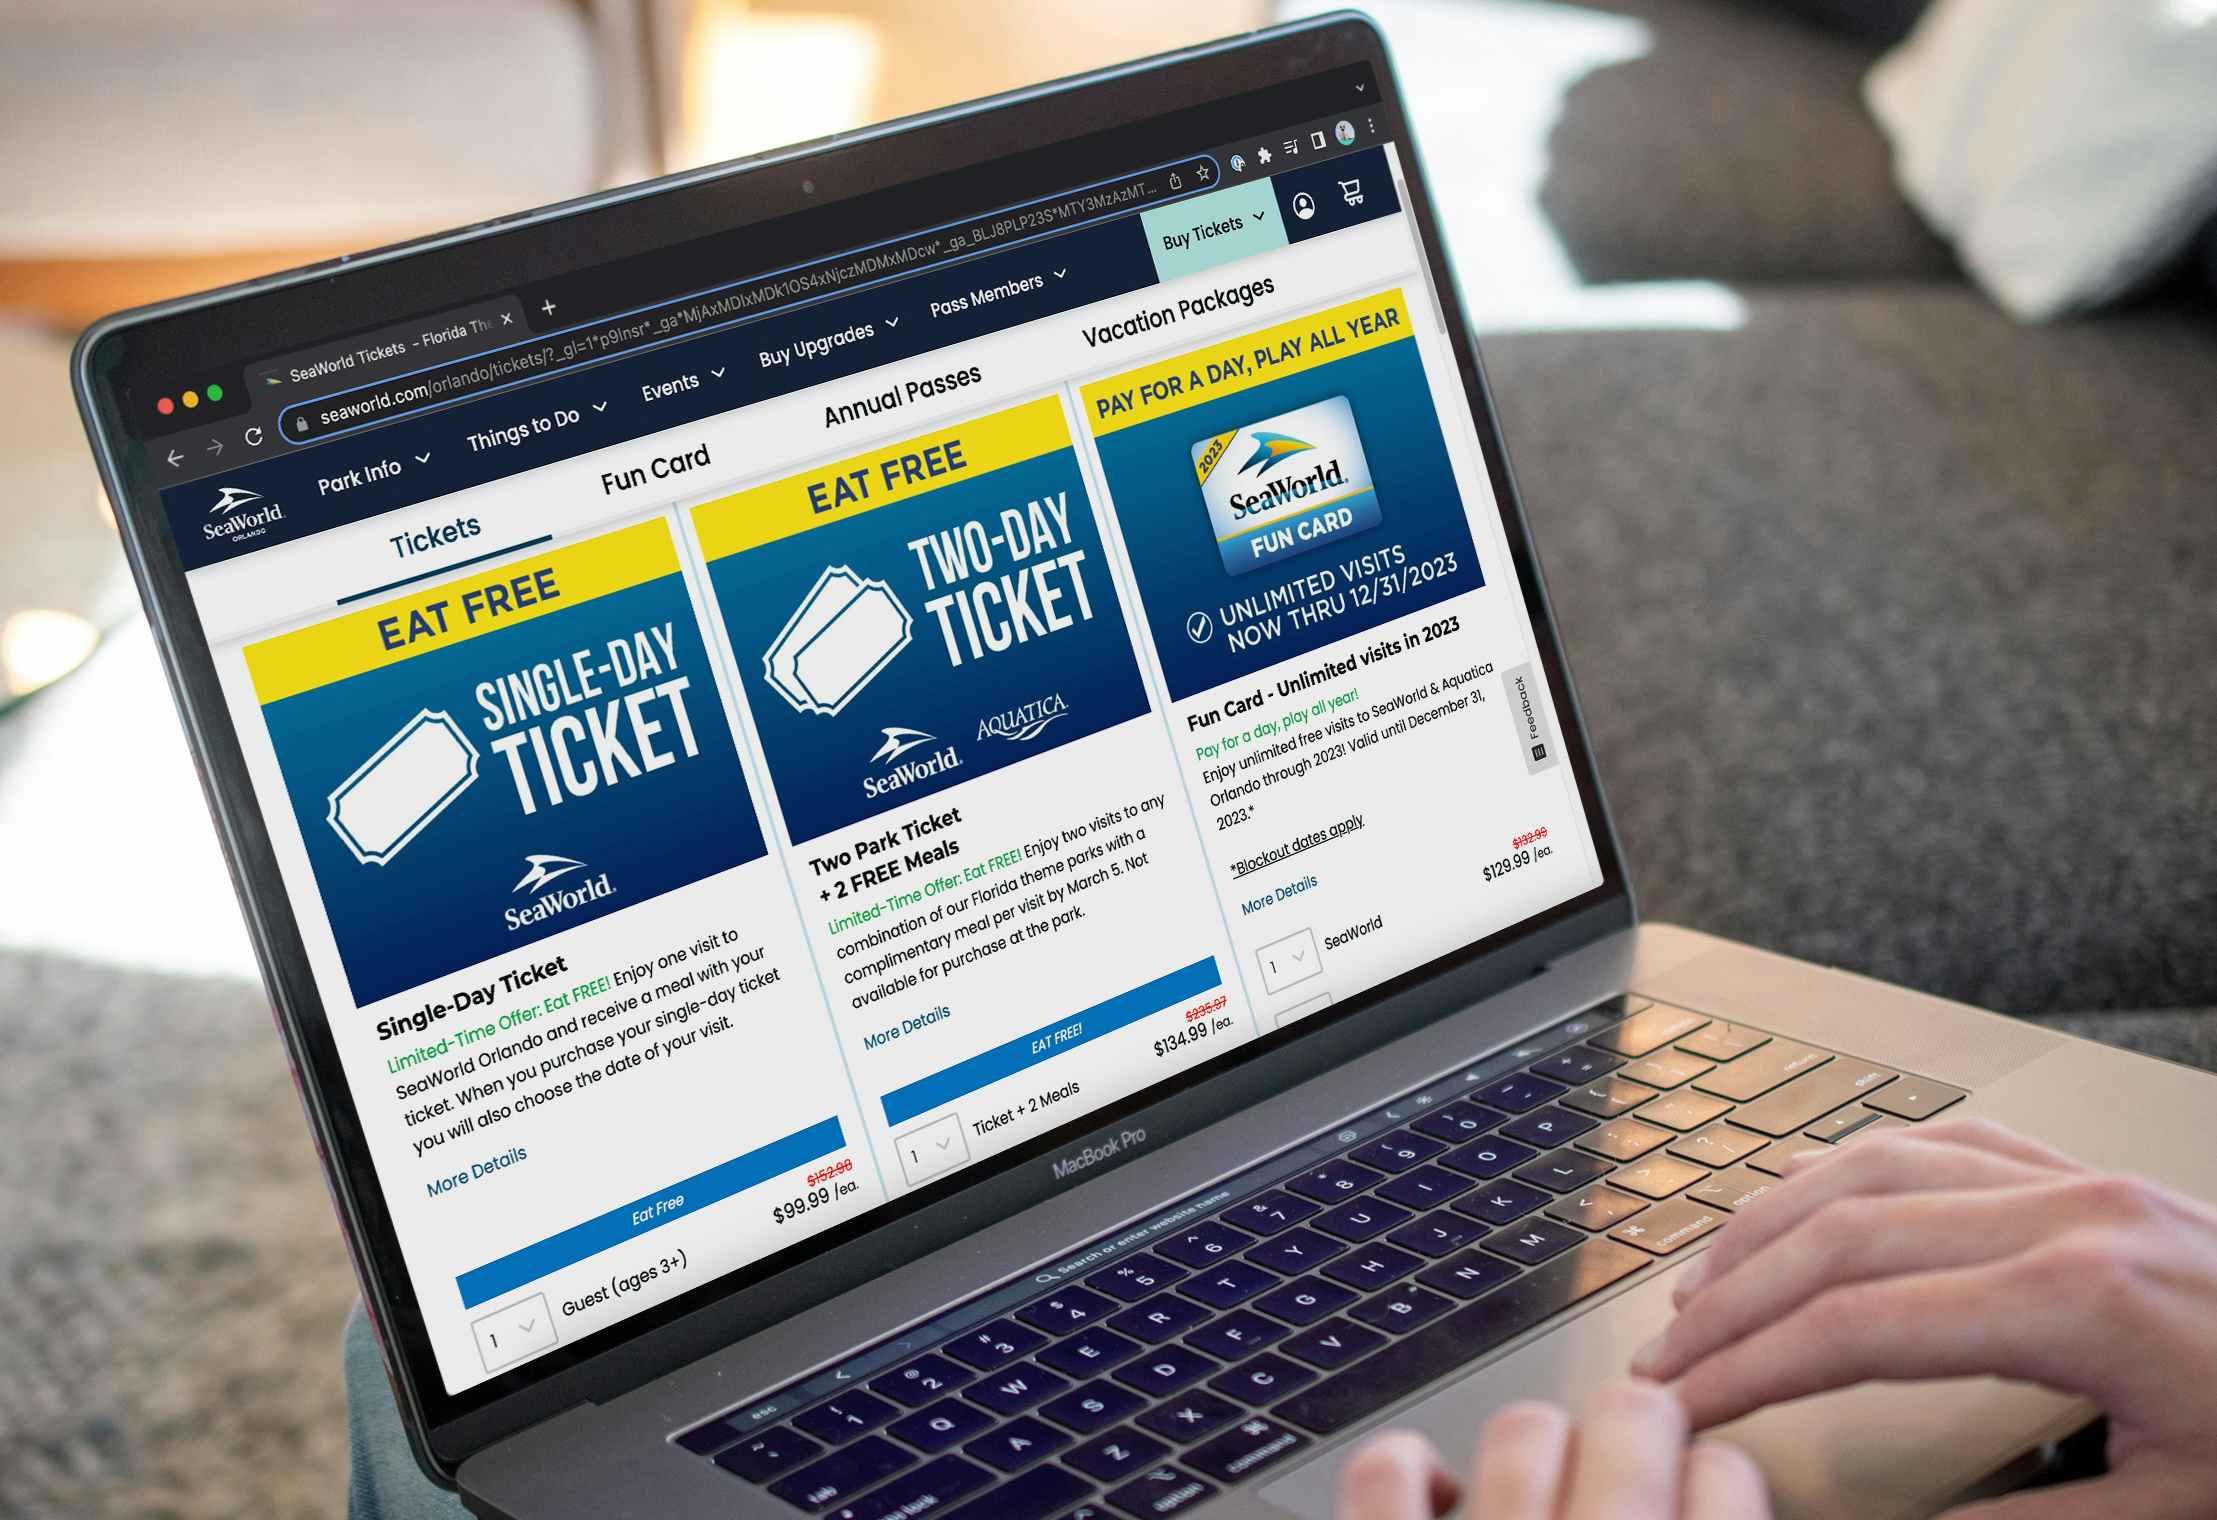 A laptop open to the Sea World ticket buying webpage